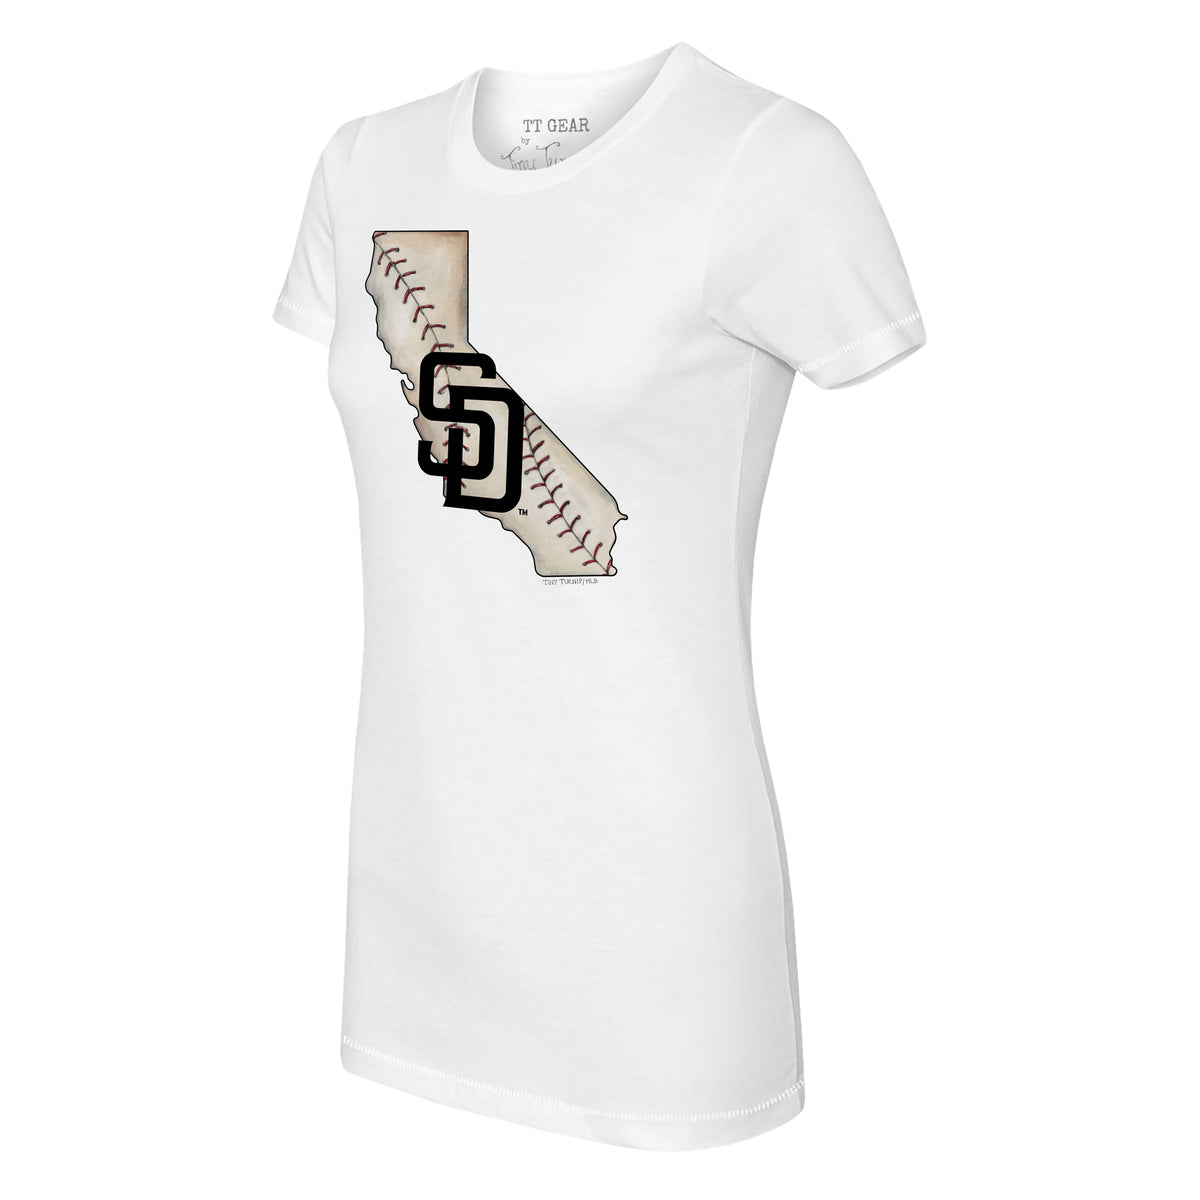 Official Women's San Diego Padres Gear, Womens Padres Apparel